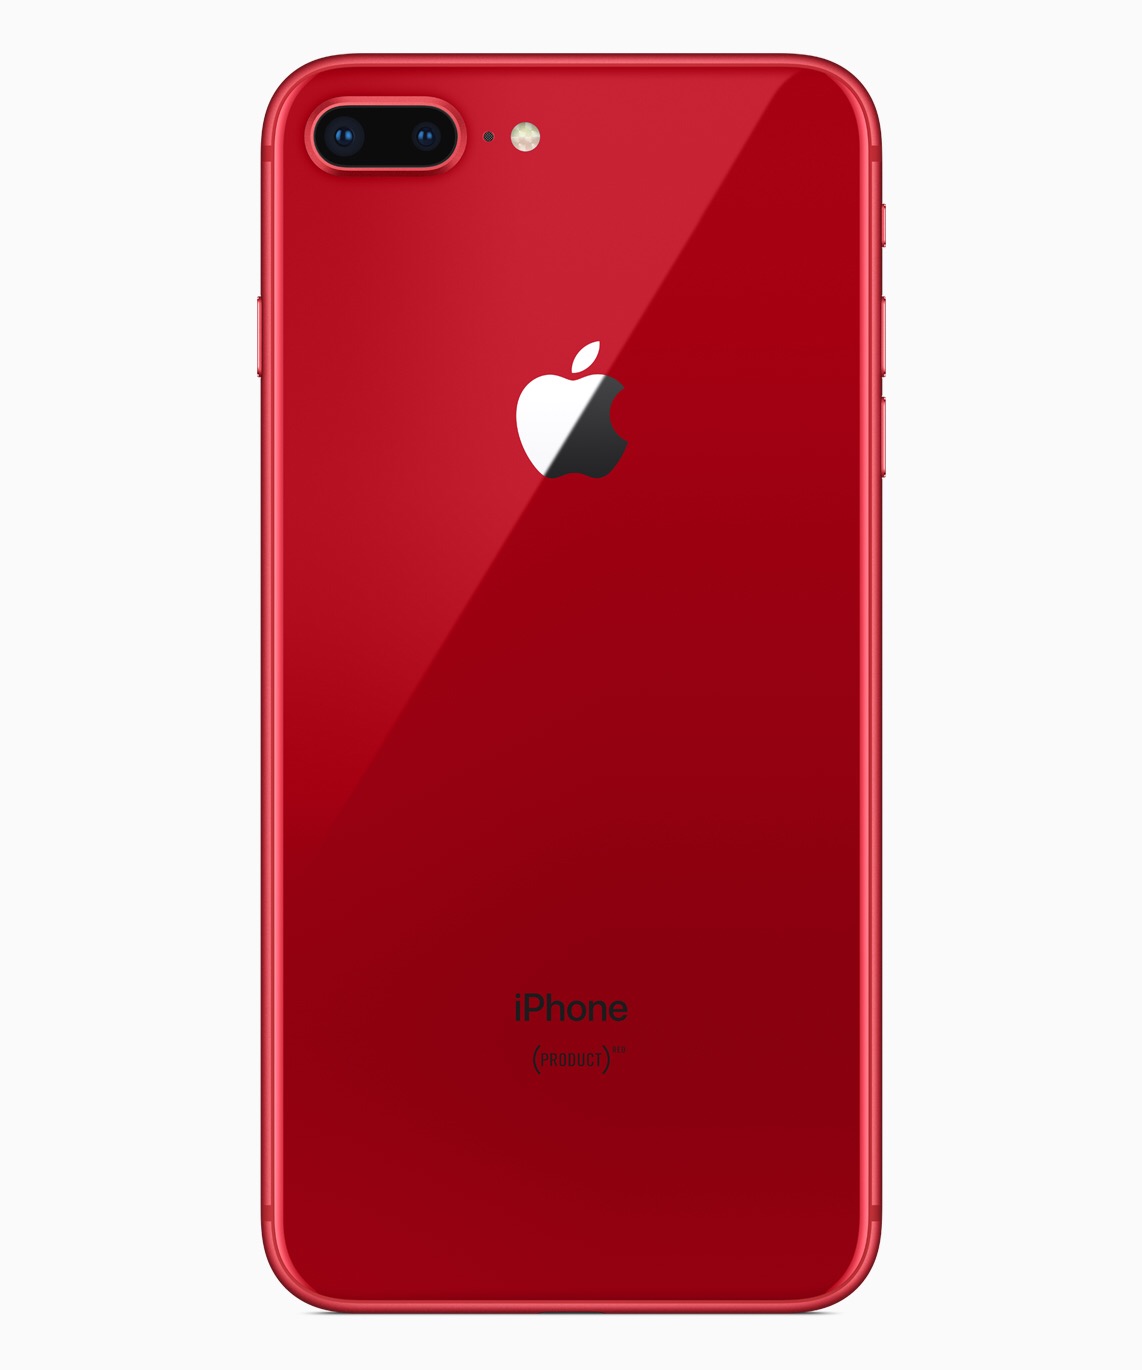 Apple's iPhone 8, 8 Plus goes red to help folks in need ...